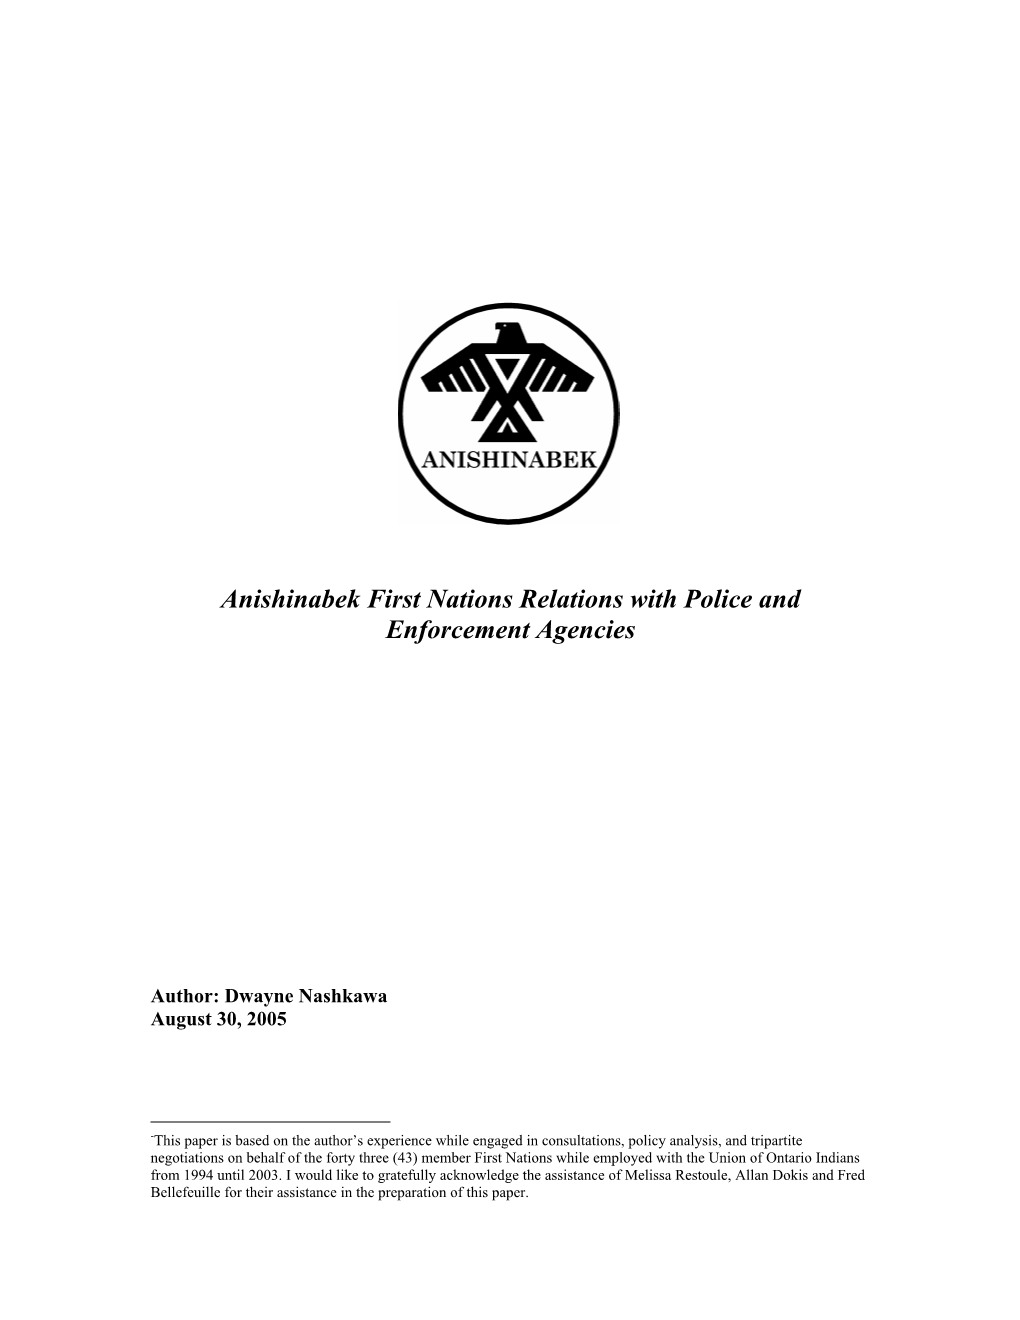 Anishinabek First Nations Relations with Police and Enforcement Agencies